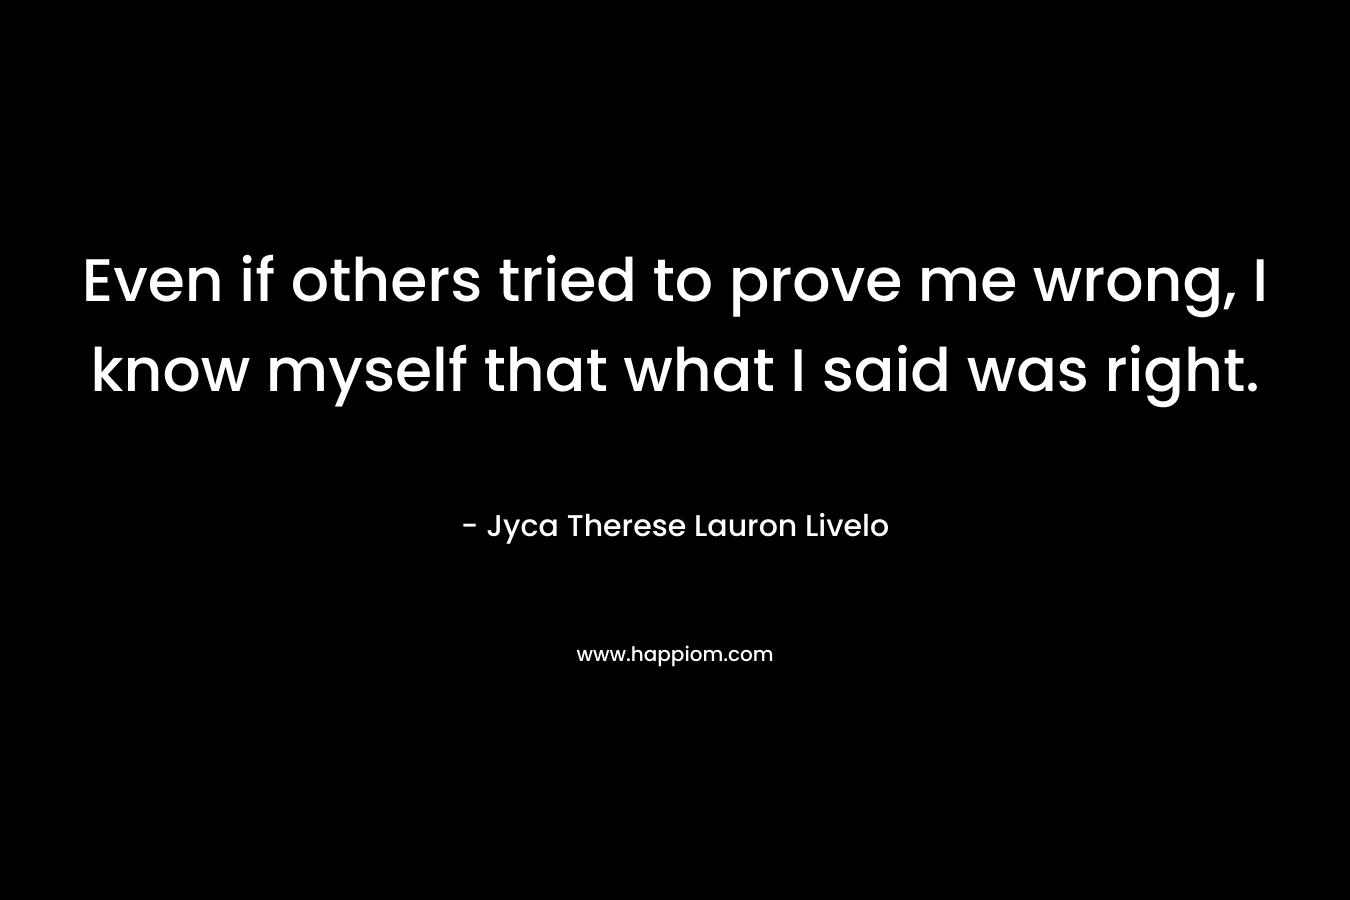 Even if others tried to prove me wrong, I know myself that what I said was right. – Jyca Therese Lauron Livelo